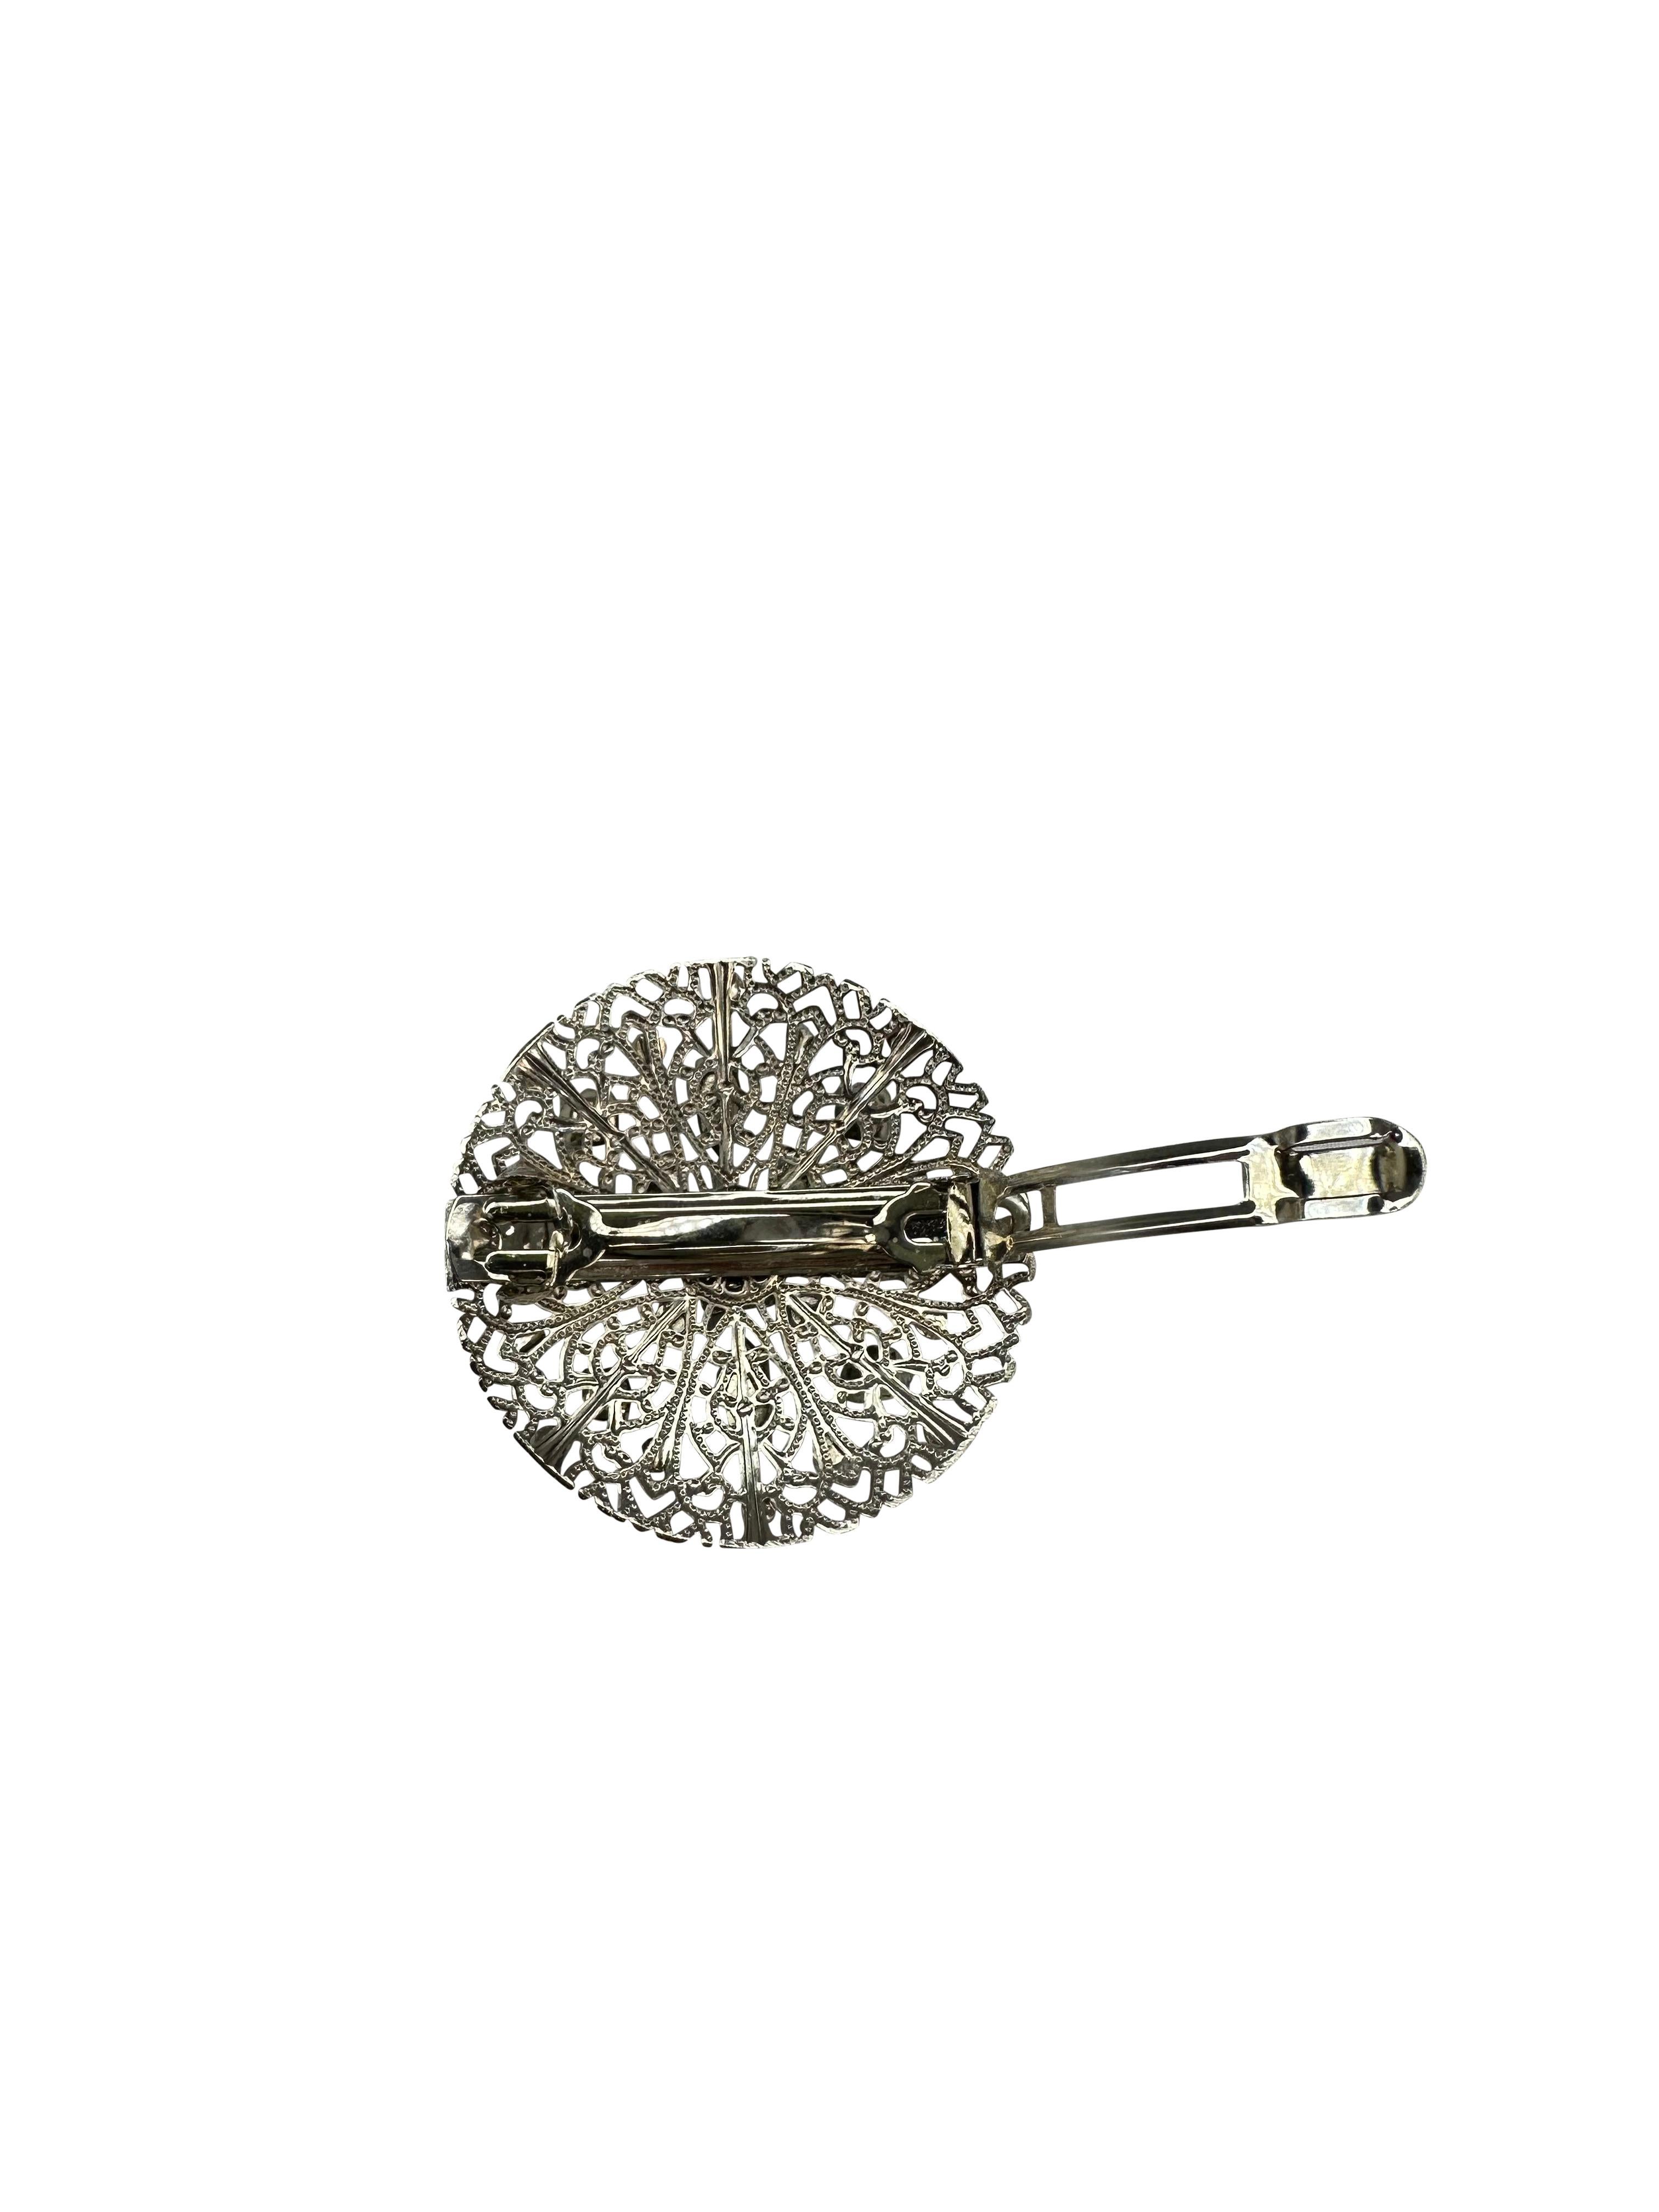 Women's F/W 1998 Gianni Versace by Donatella Silver Tone Round Black Crystal Hair Clip For Sale